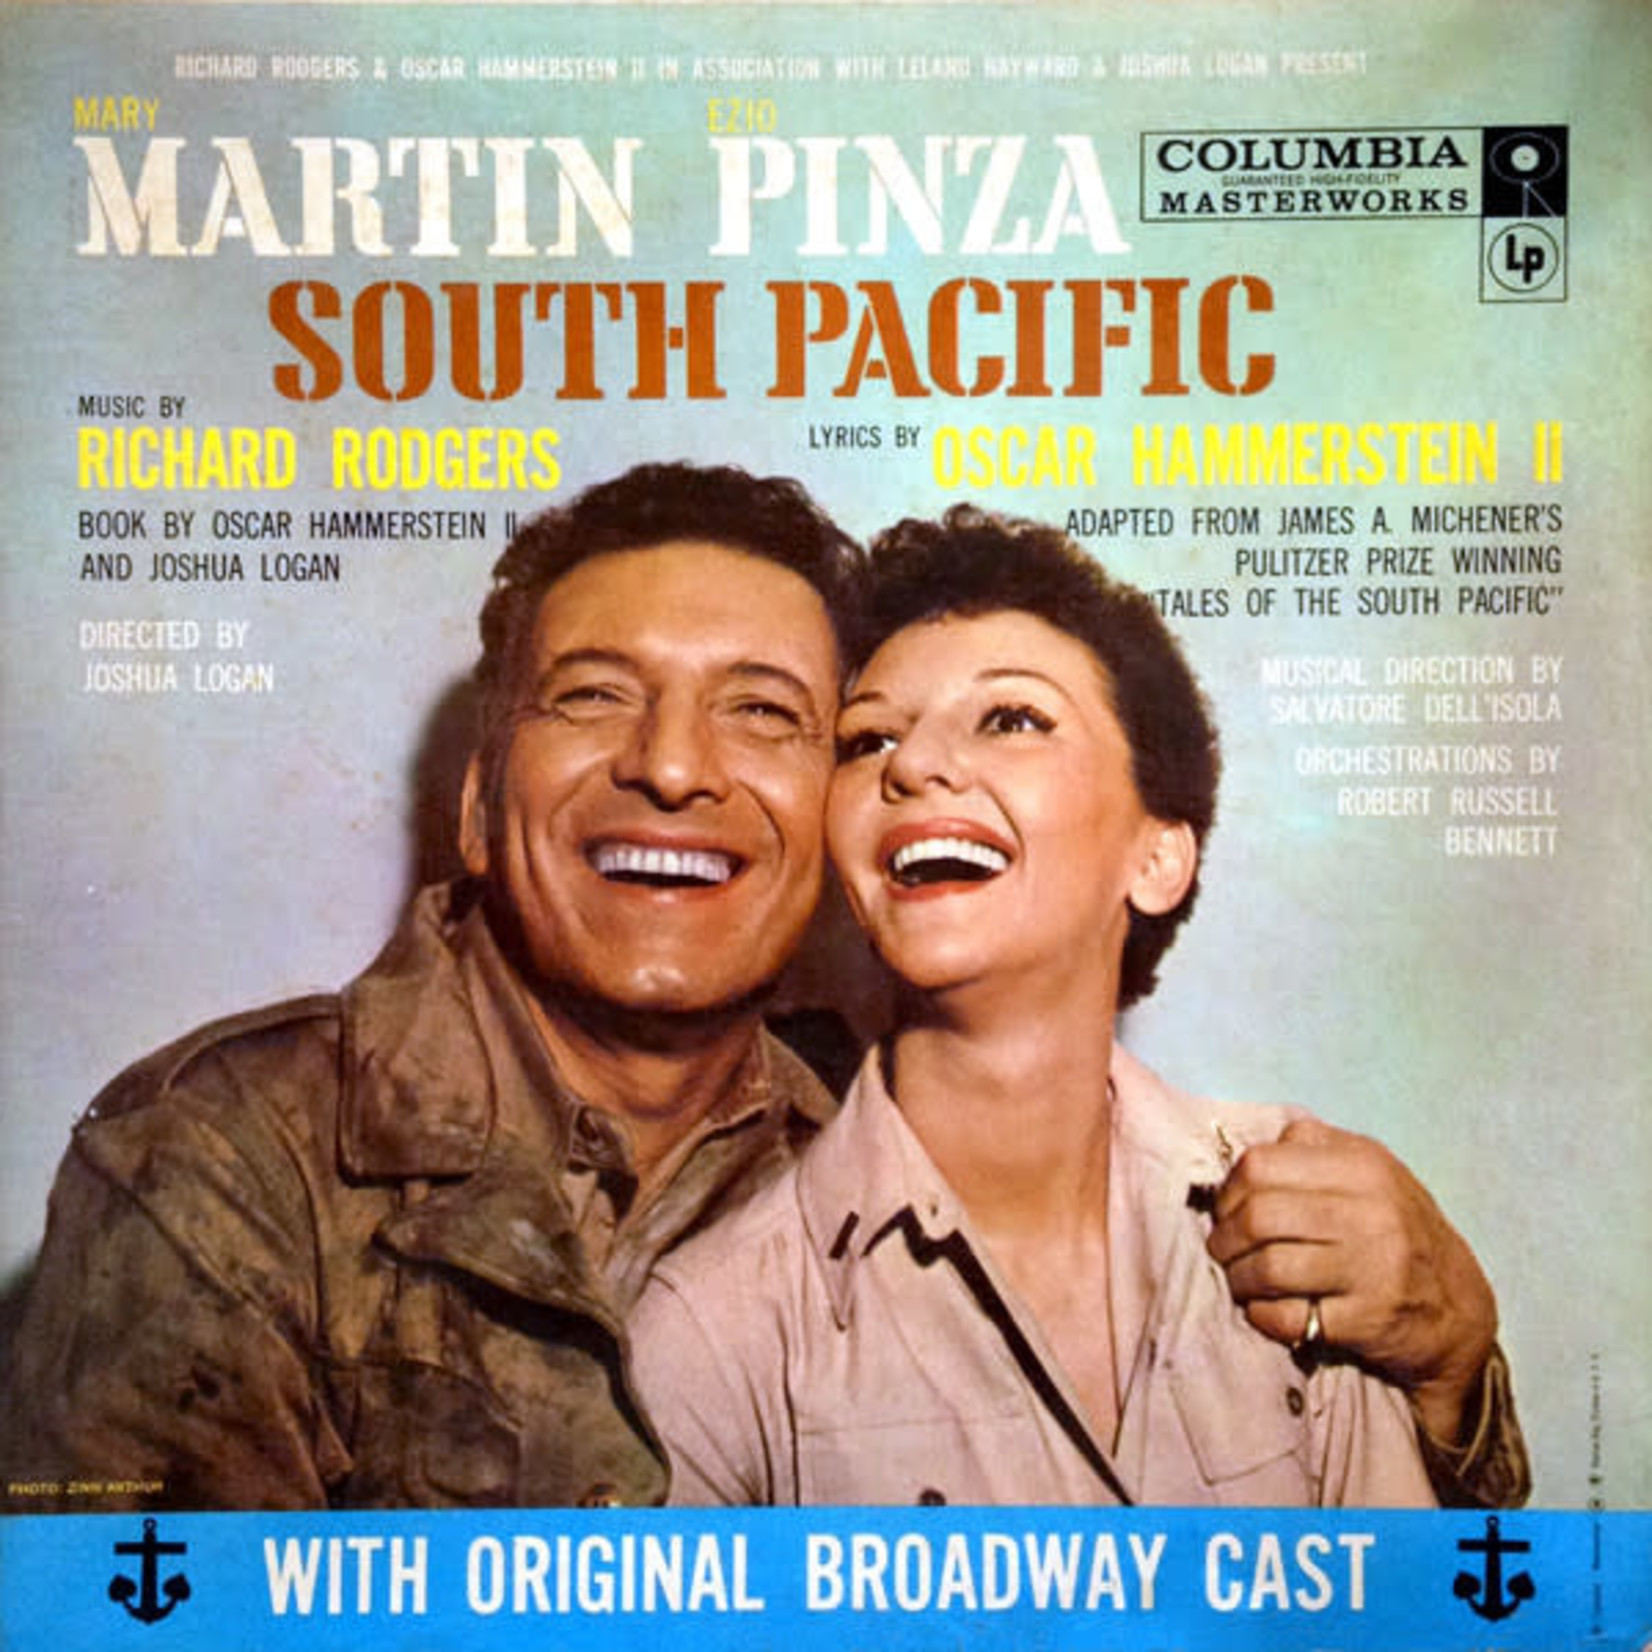 [Vintage] Original Broadway Cast (Rodgers & Hammerstein) - South Pacific (Stage Soundtrack)